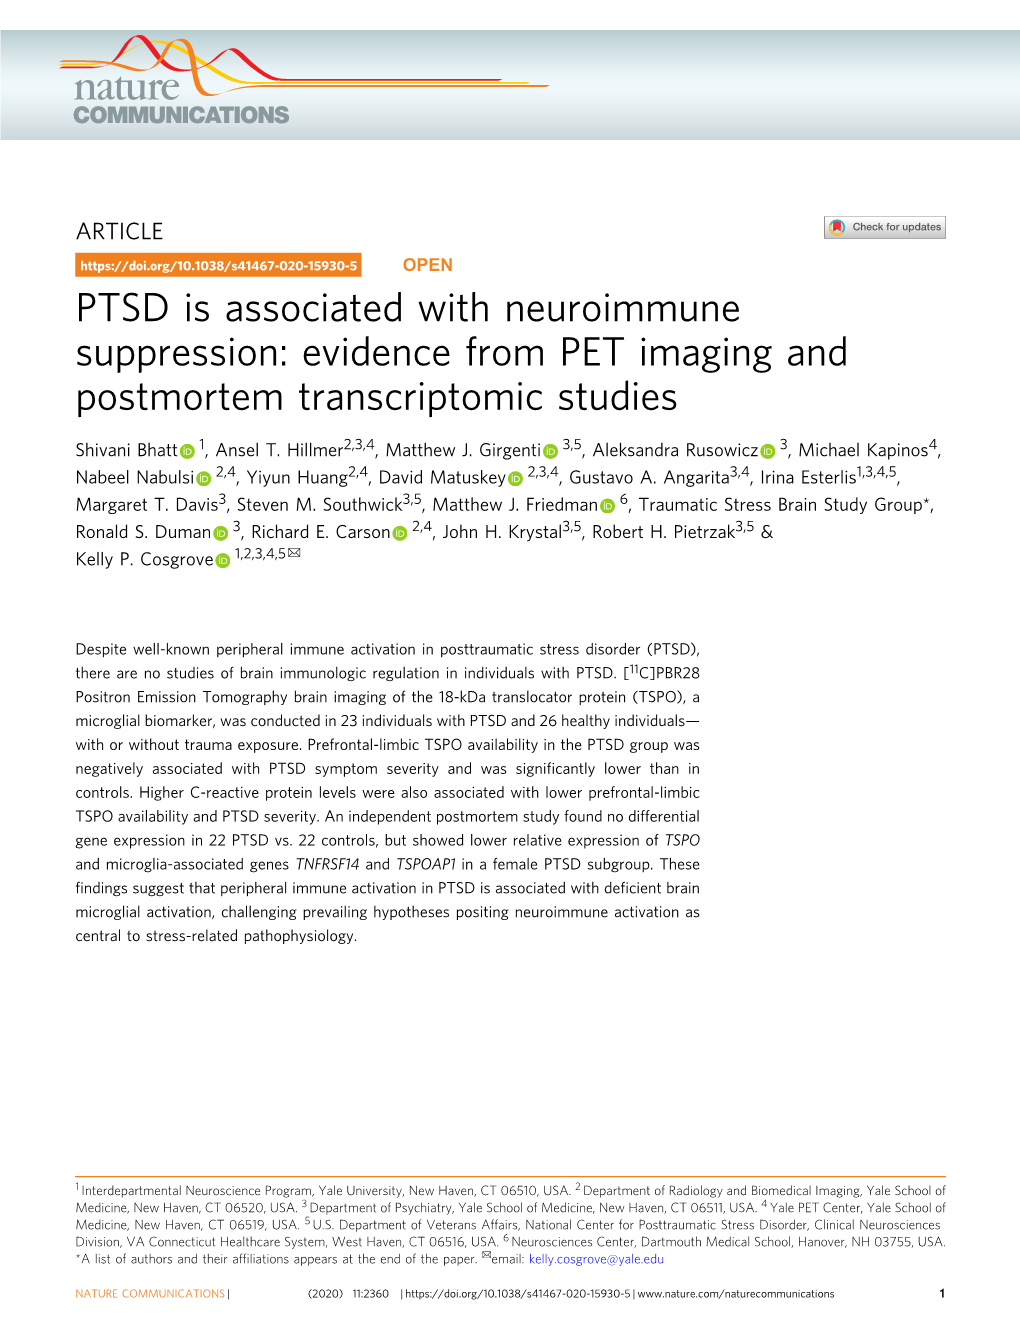 PTSD Is Associated with Neuroimmune Suppression: Evidence from PET Imaging and Postmortem Transcriptomic Studies